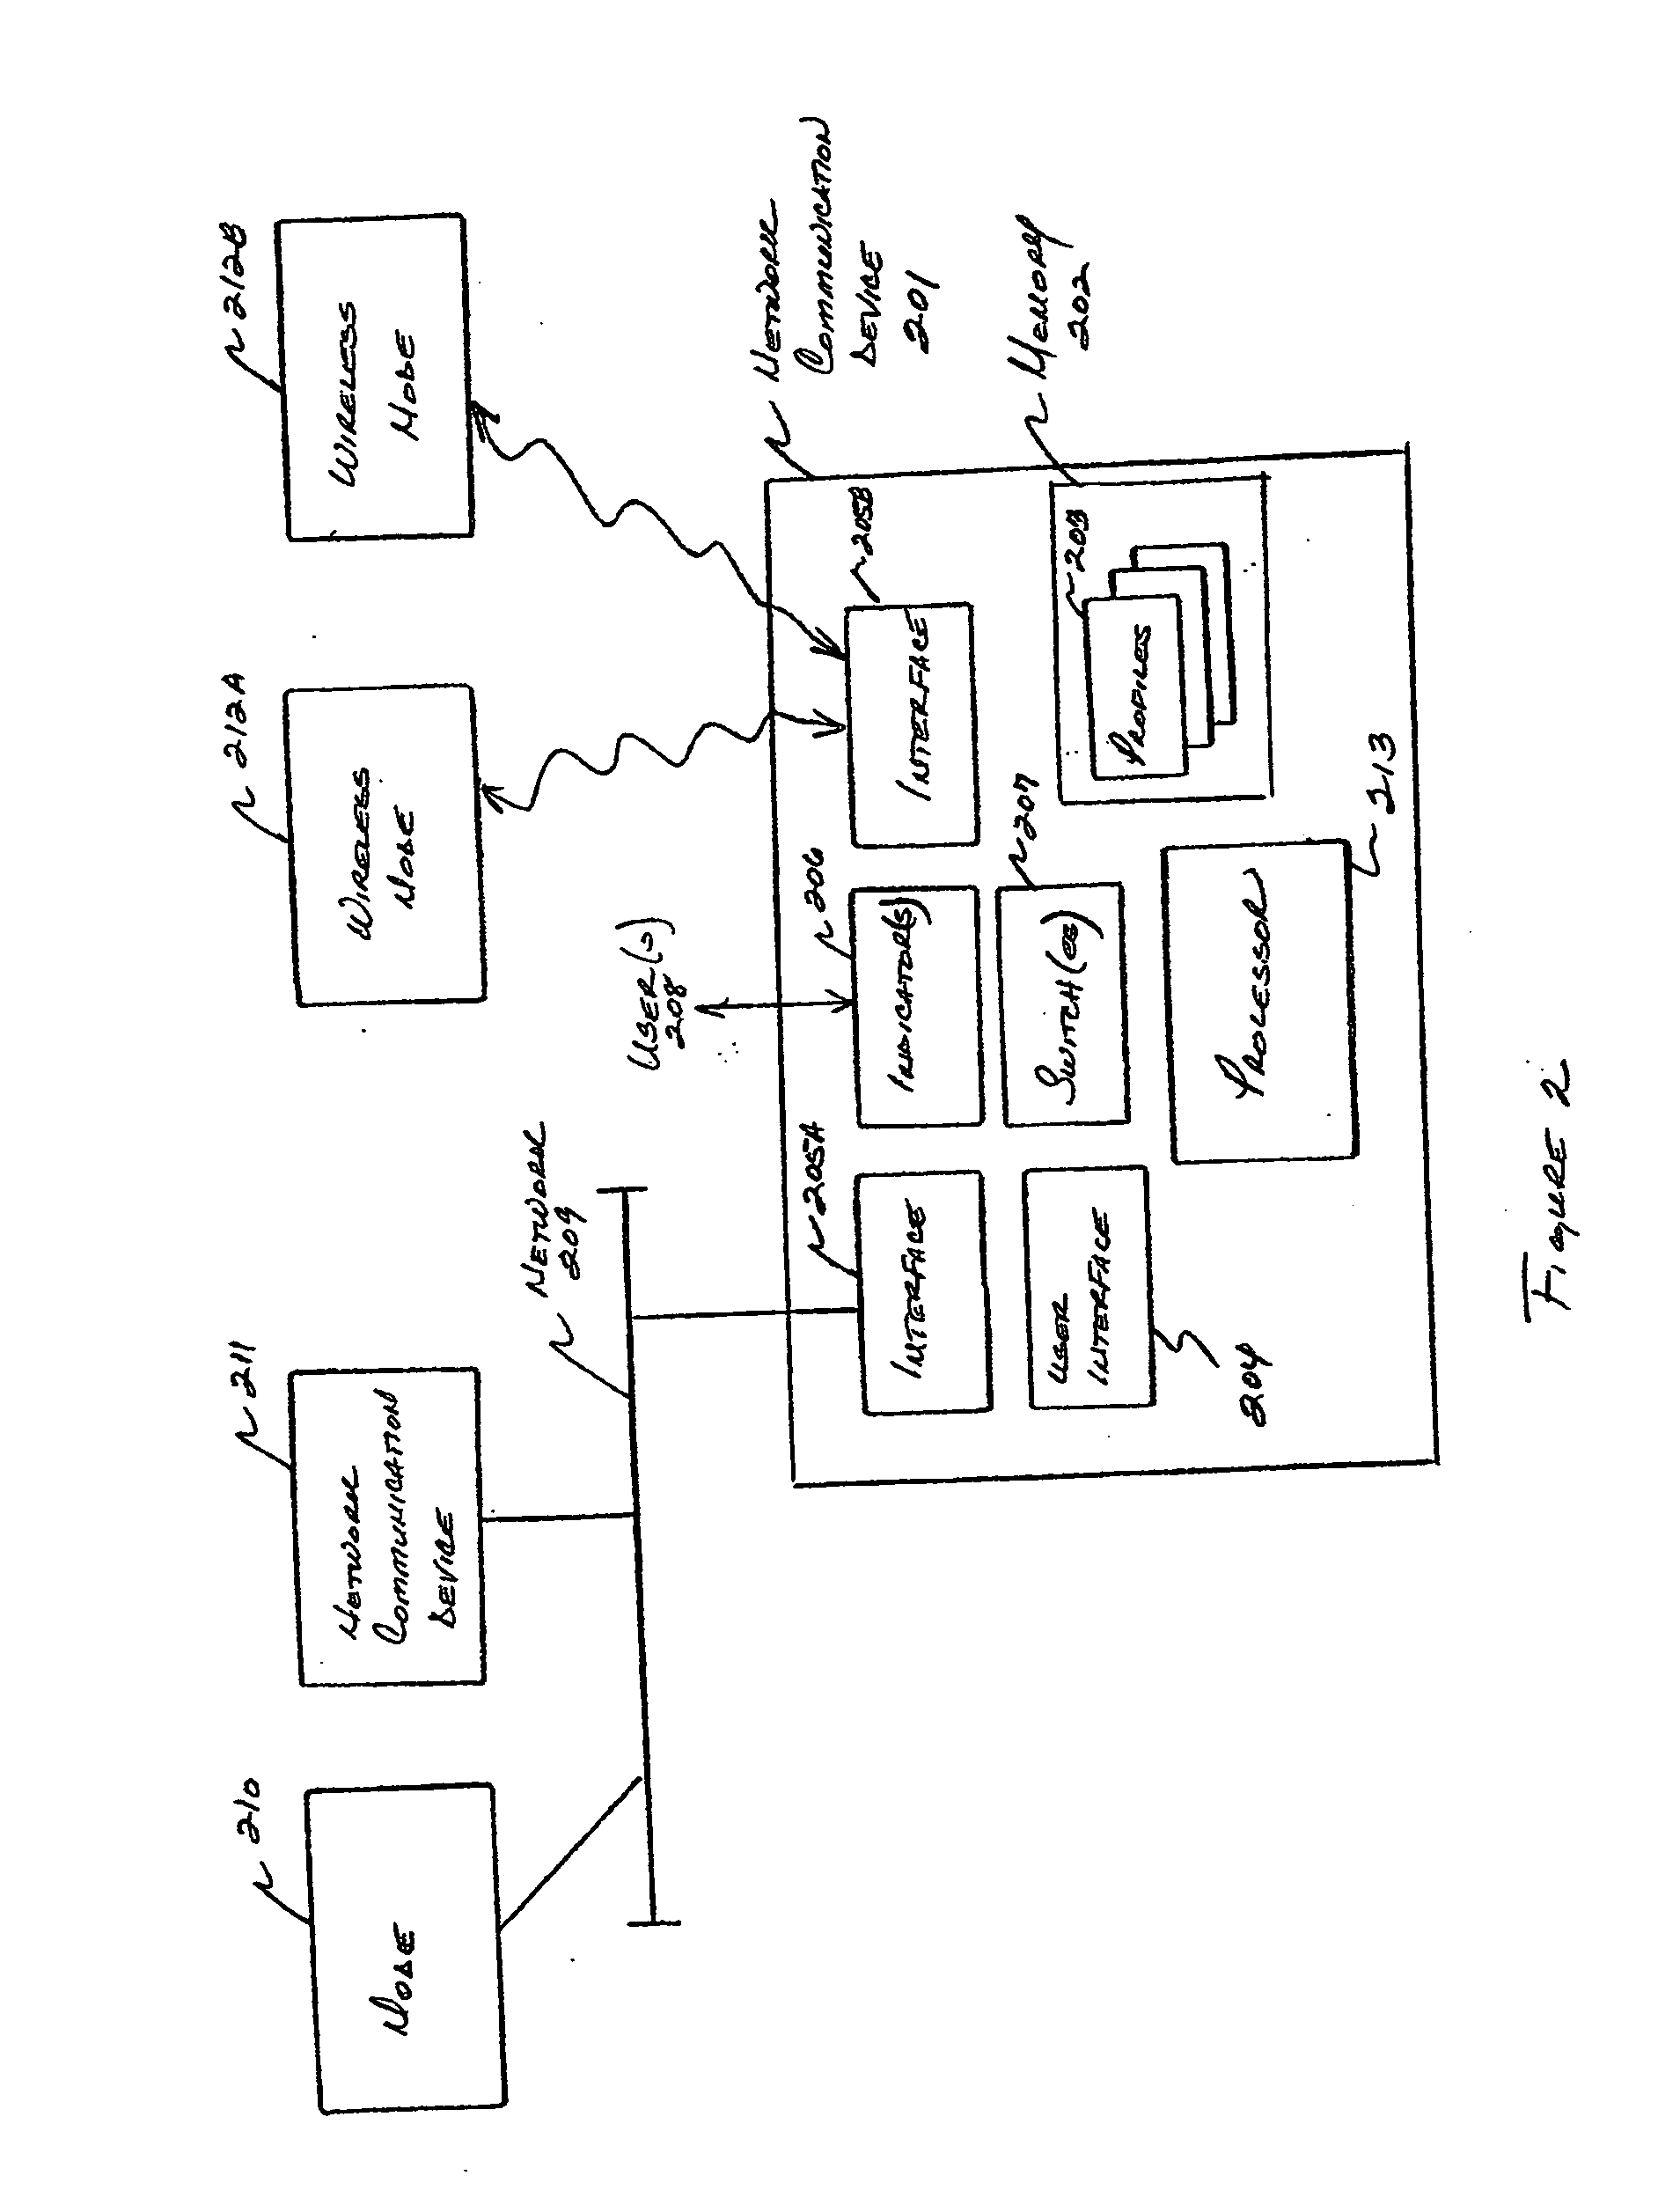 Method and apparatus for selecting forwarding modes